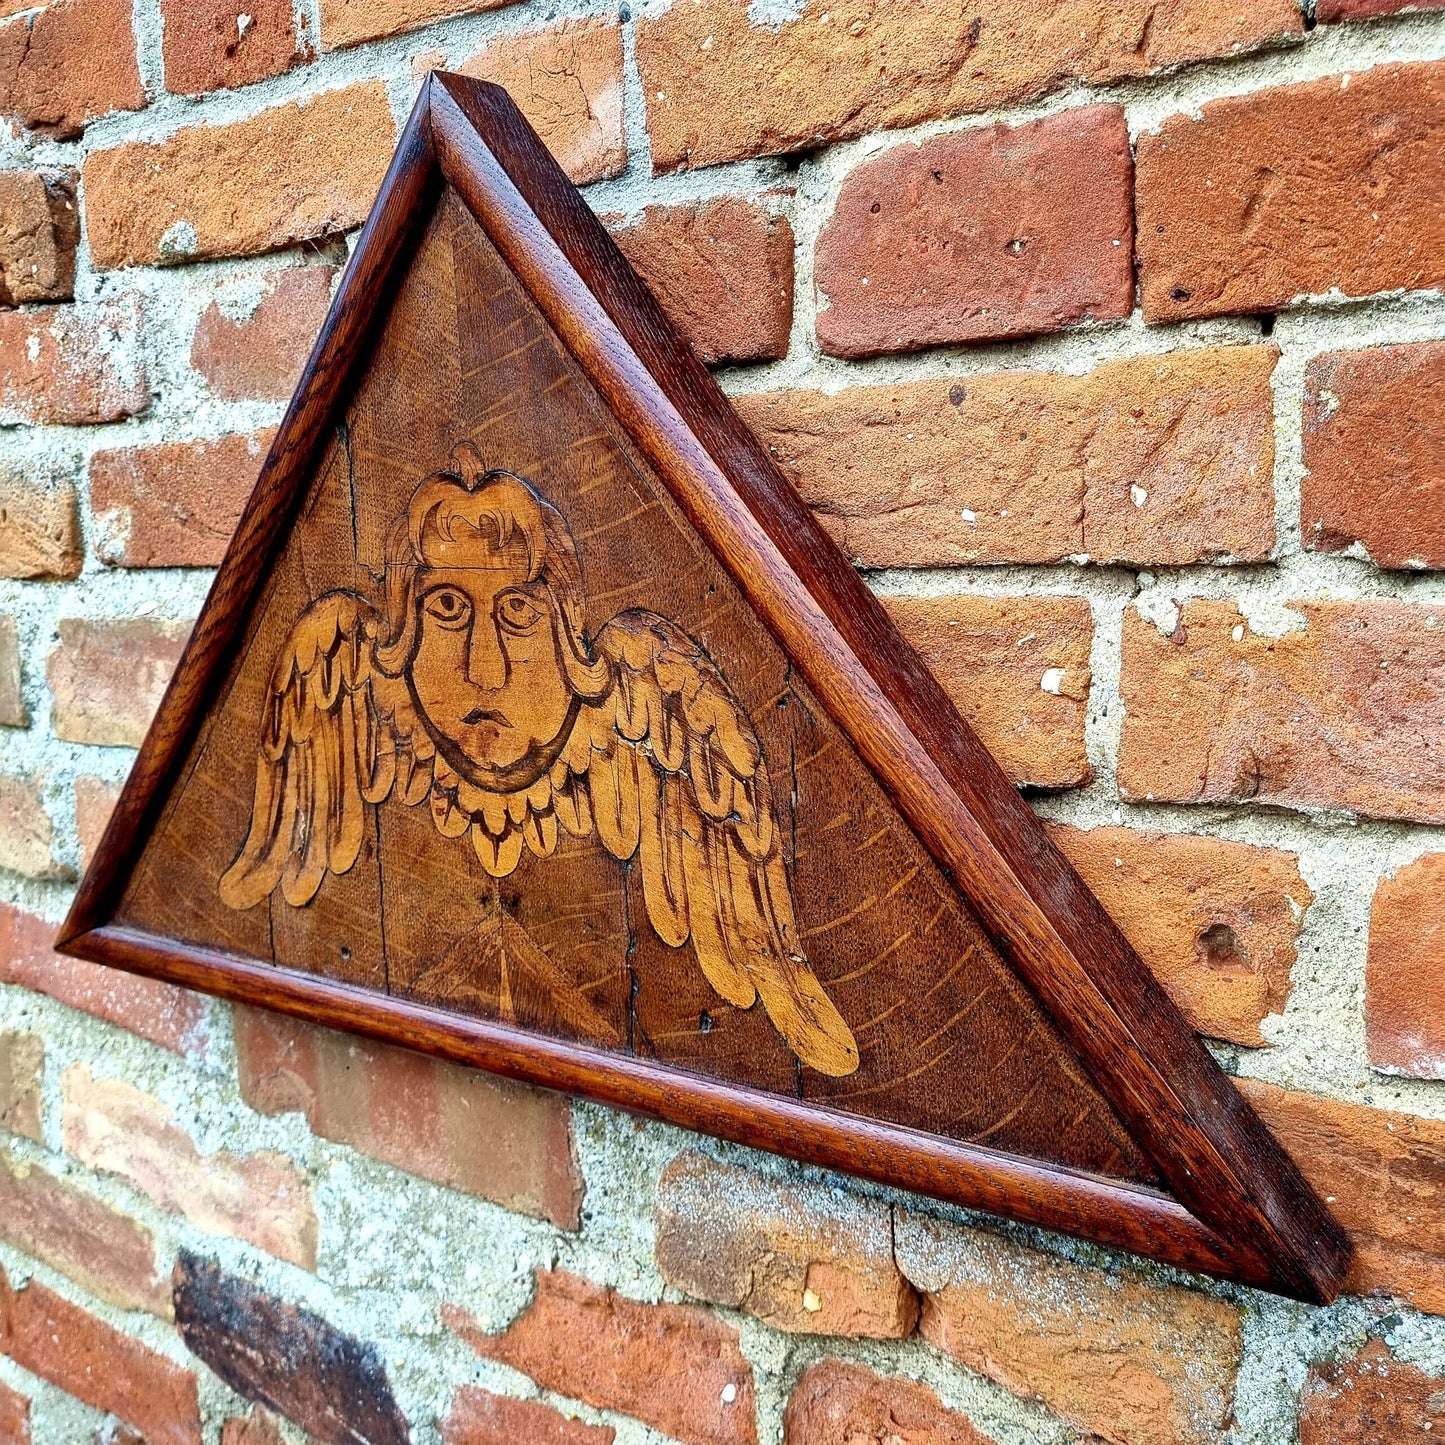 Early 18th Century Antique Oak Panel with Inlaid Veneer Depicting a Winged Angel